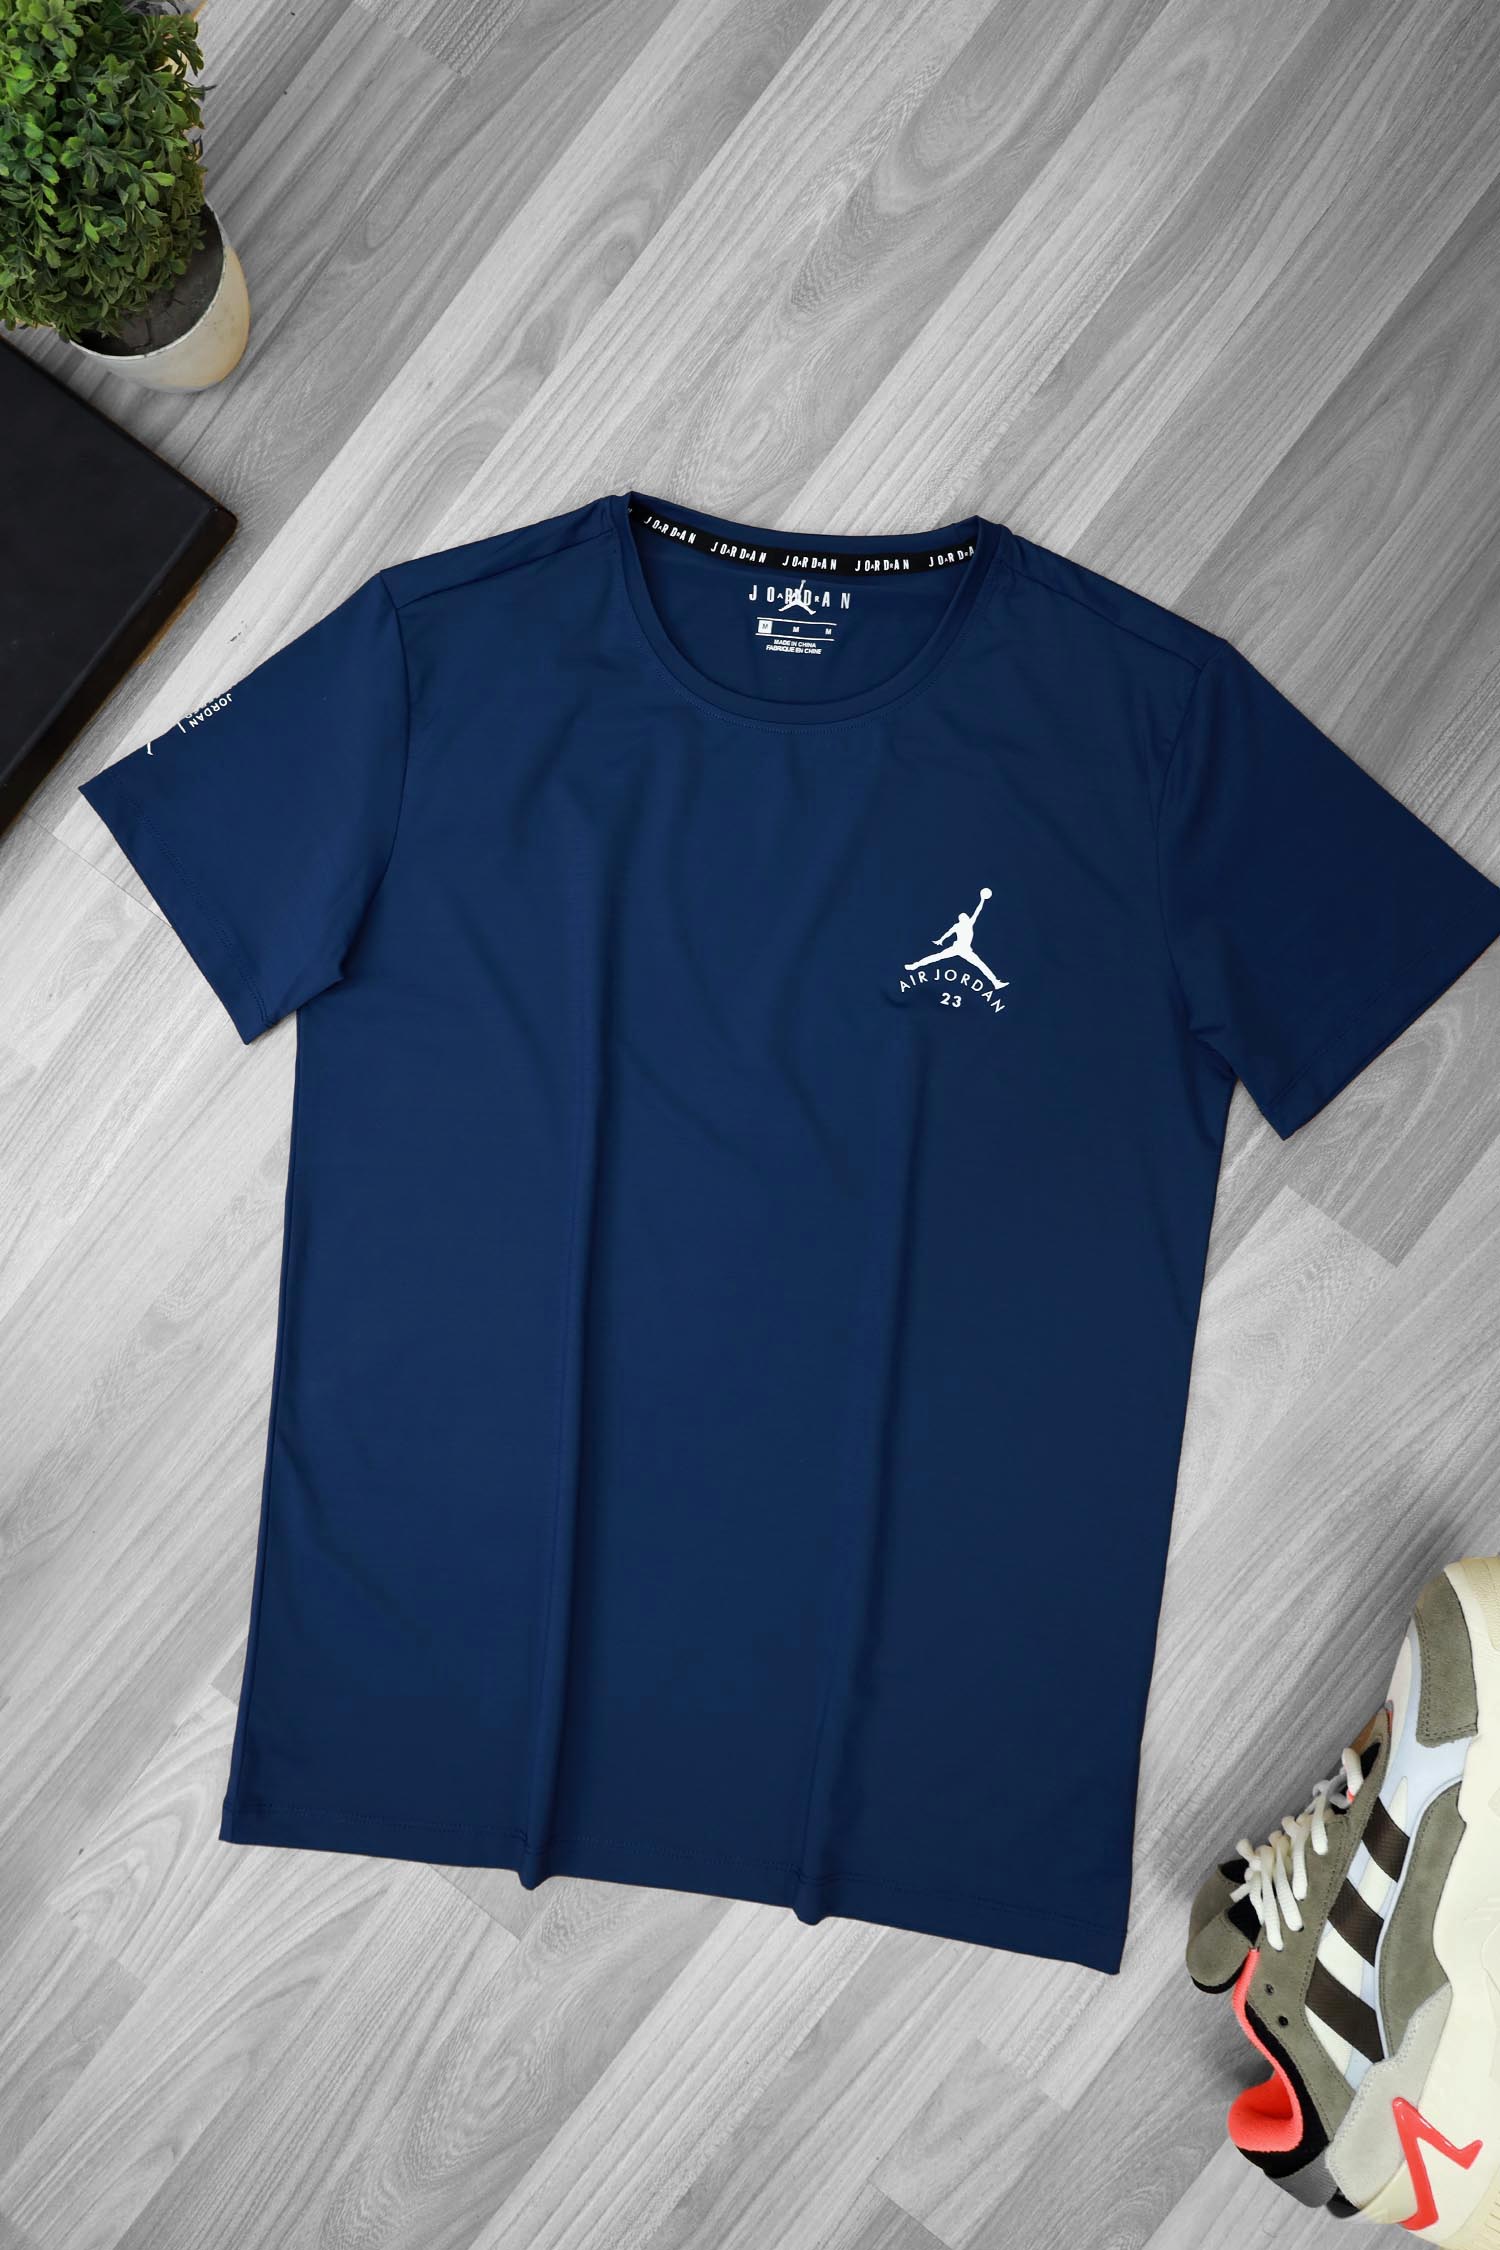 Dry Fit Crew Neck Tee With Jrdn Aplic Logo In Navy Blue